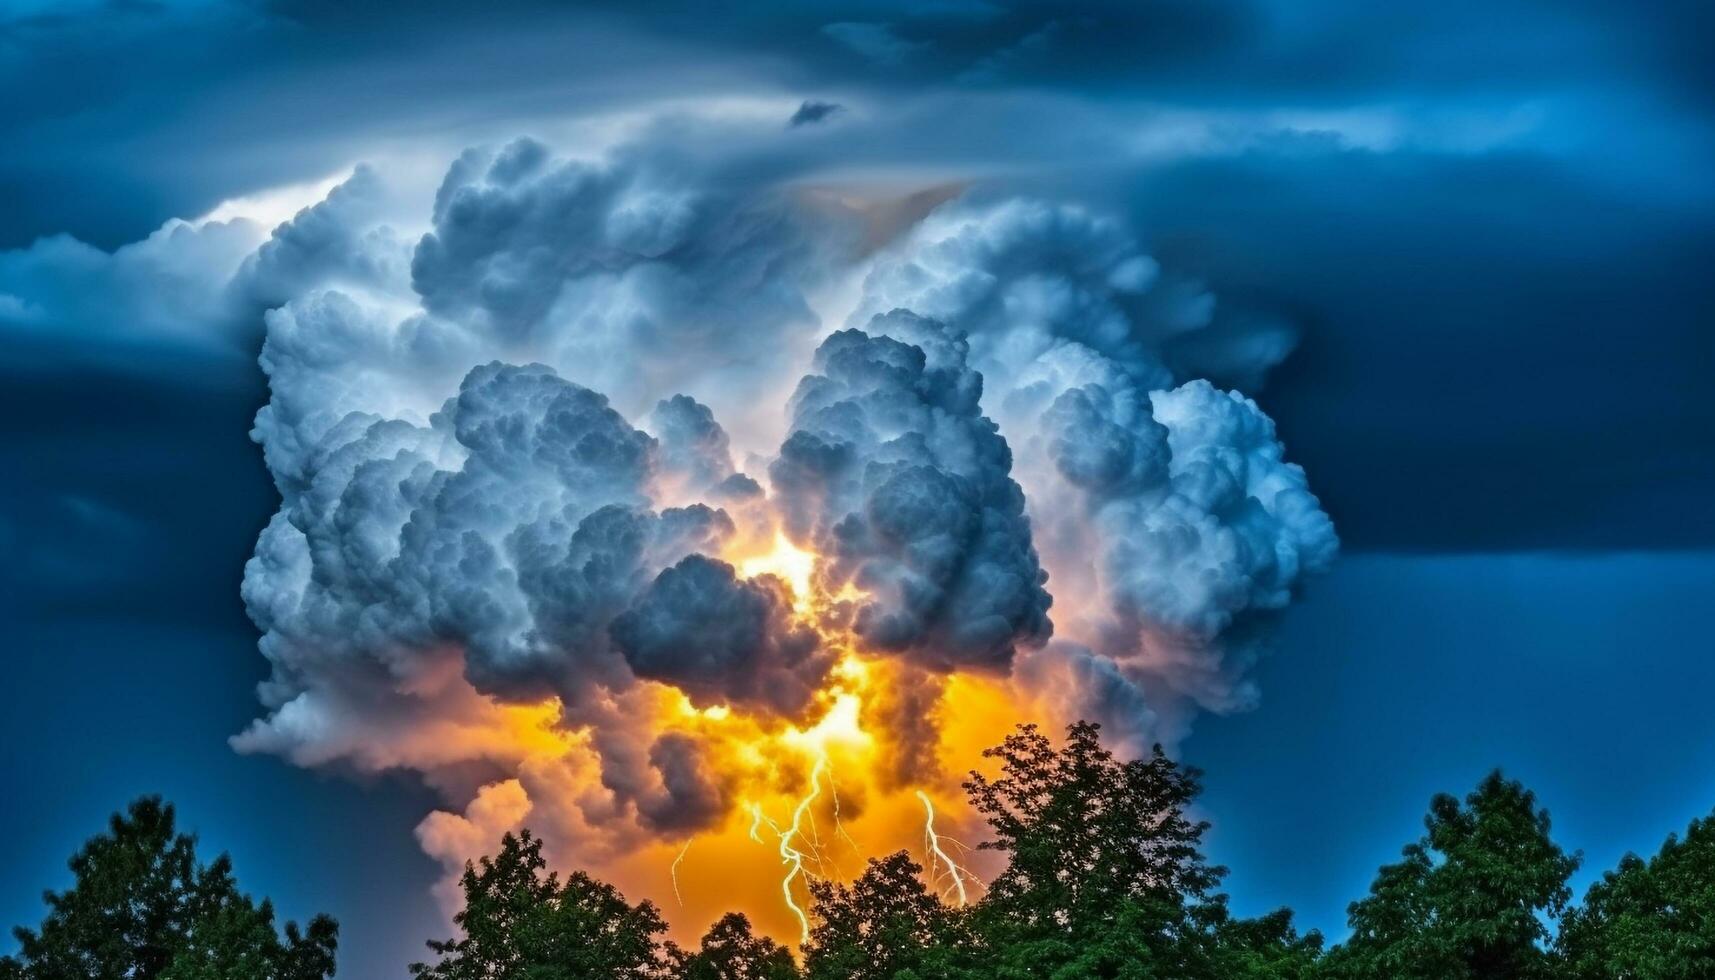 Dramatic sky over forest creates ominous beauty in nature landscape generated by AI photo